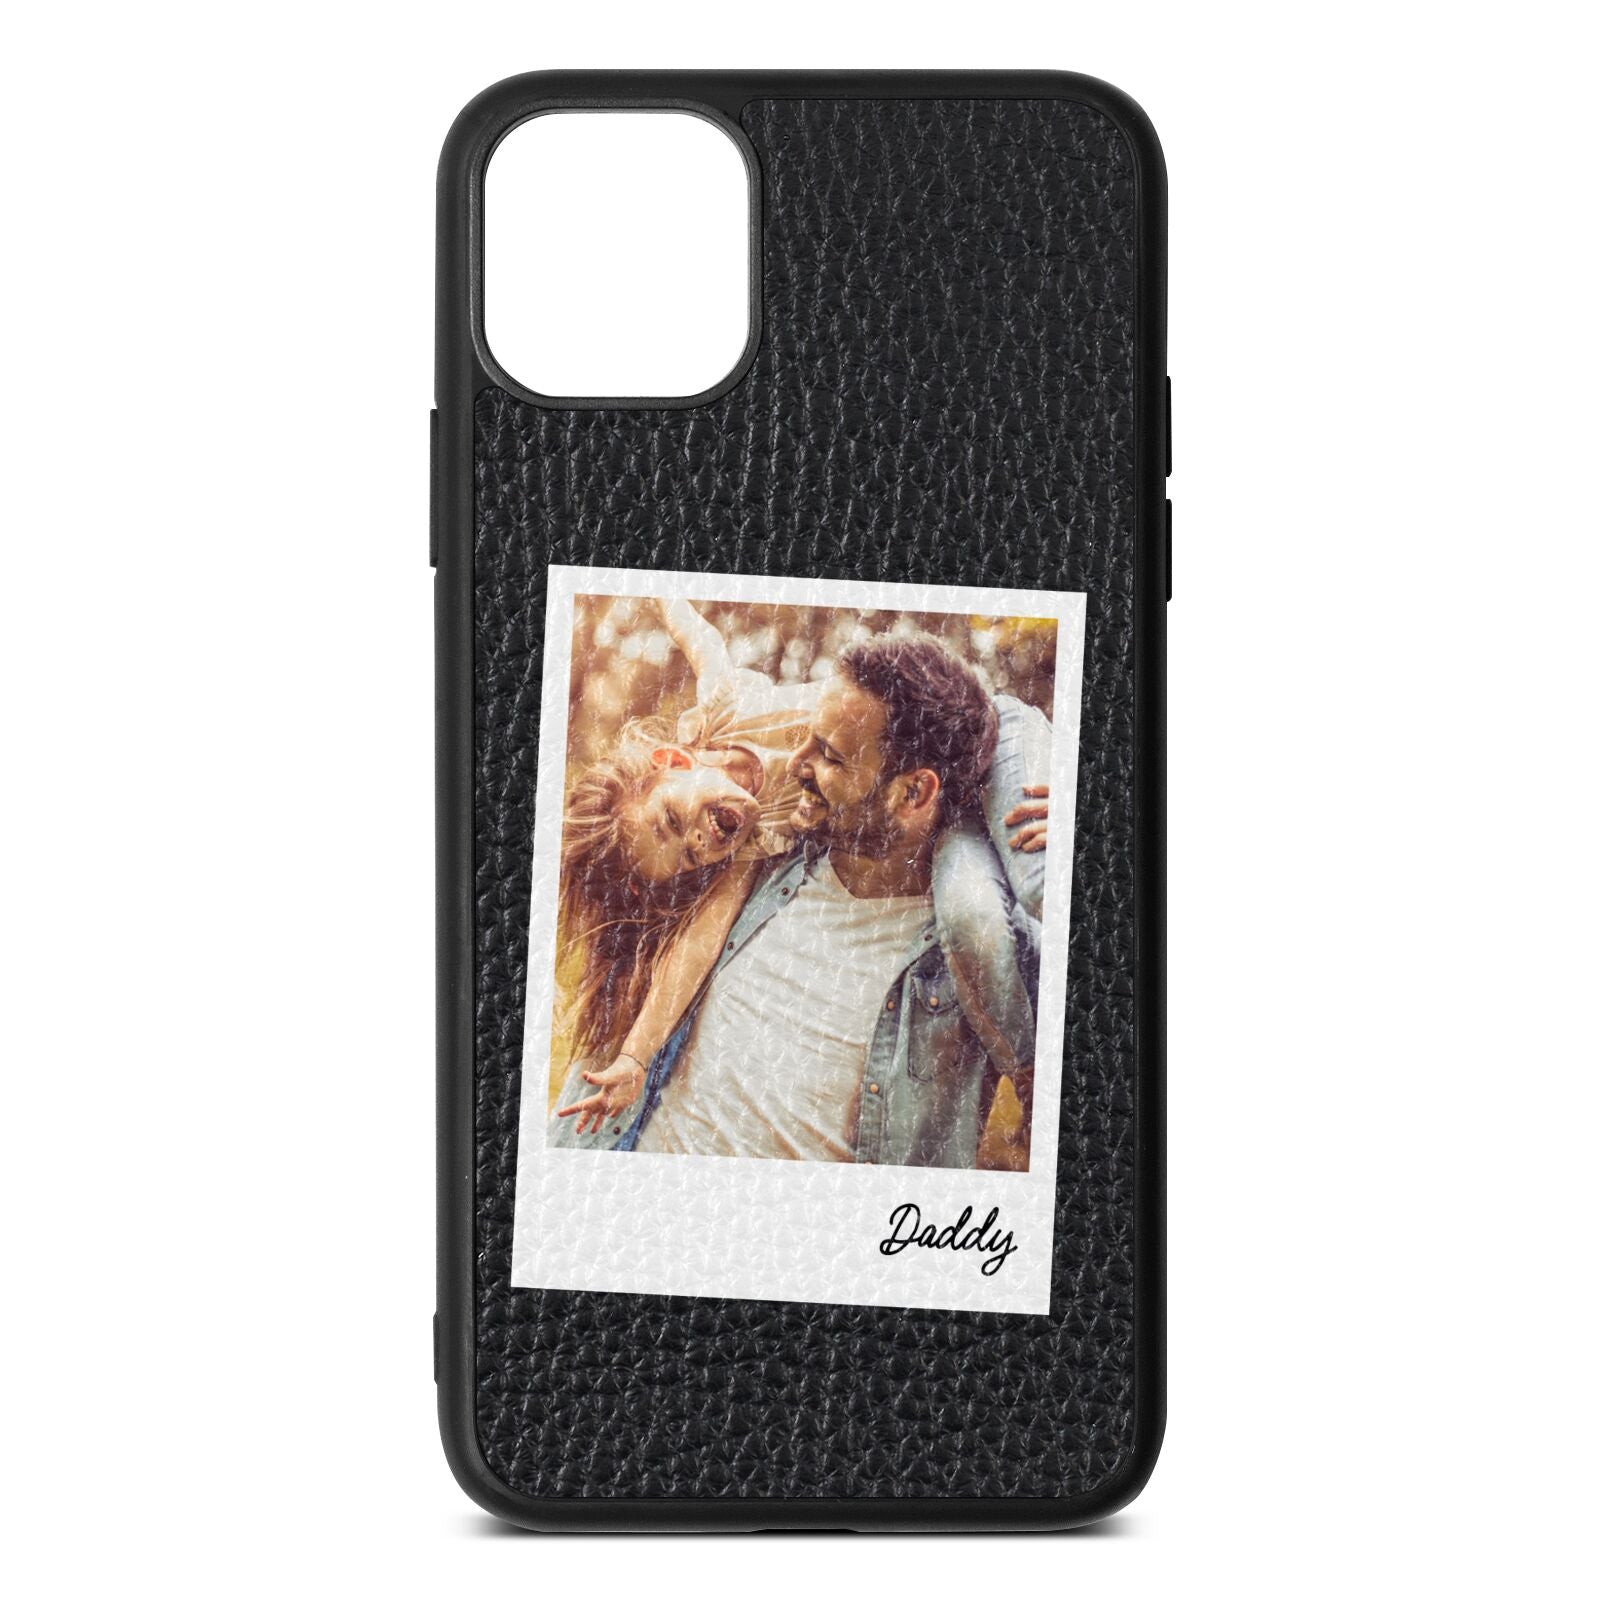 Fathers Day Photo Black Pebble Leather iPhone 11 Pro Max Case